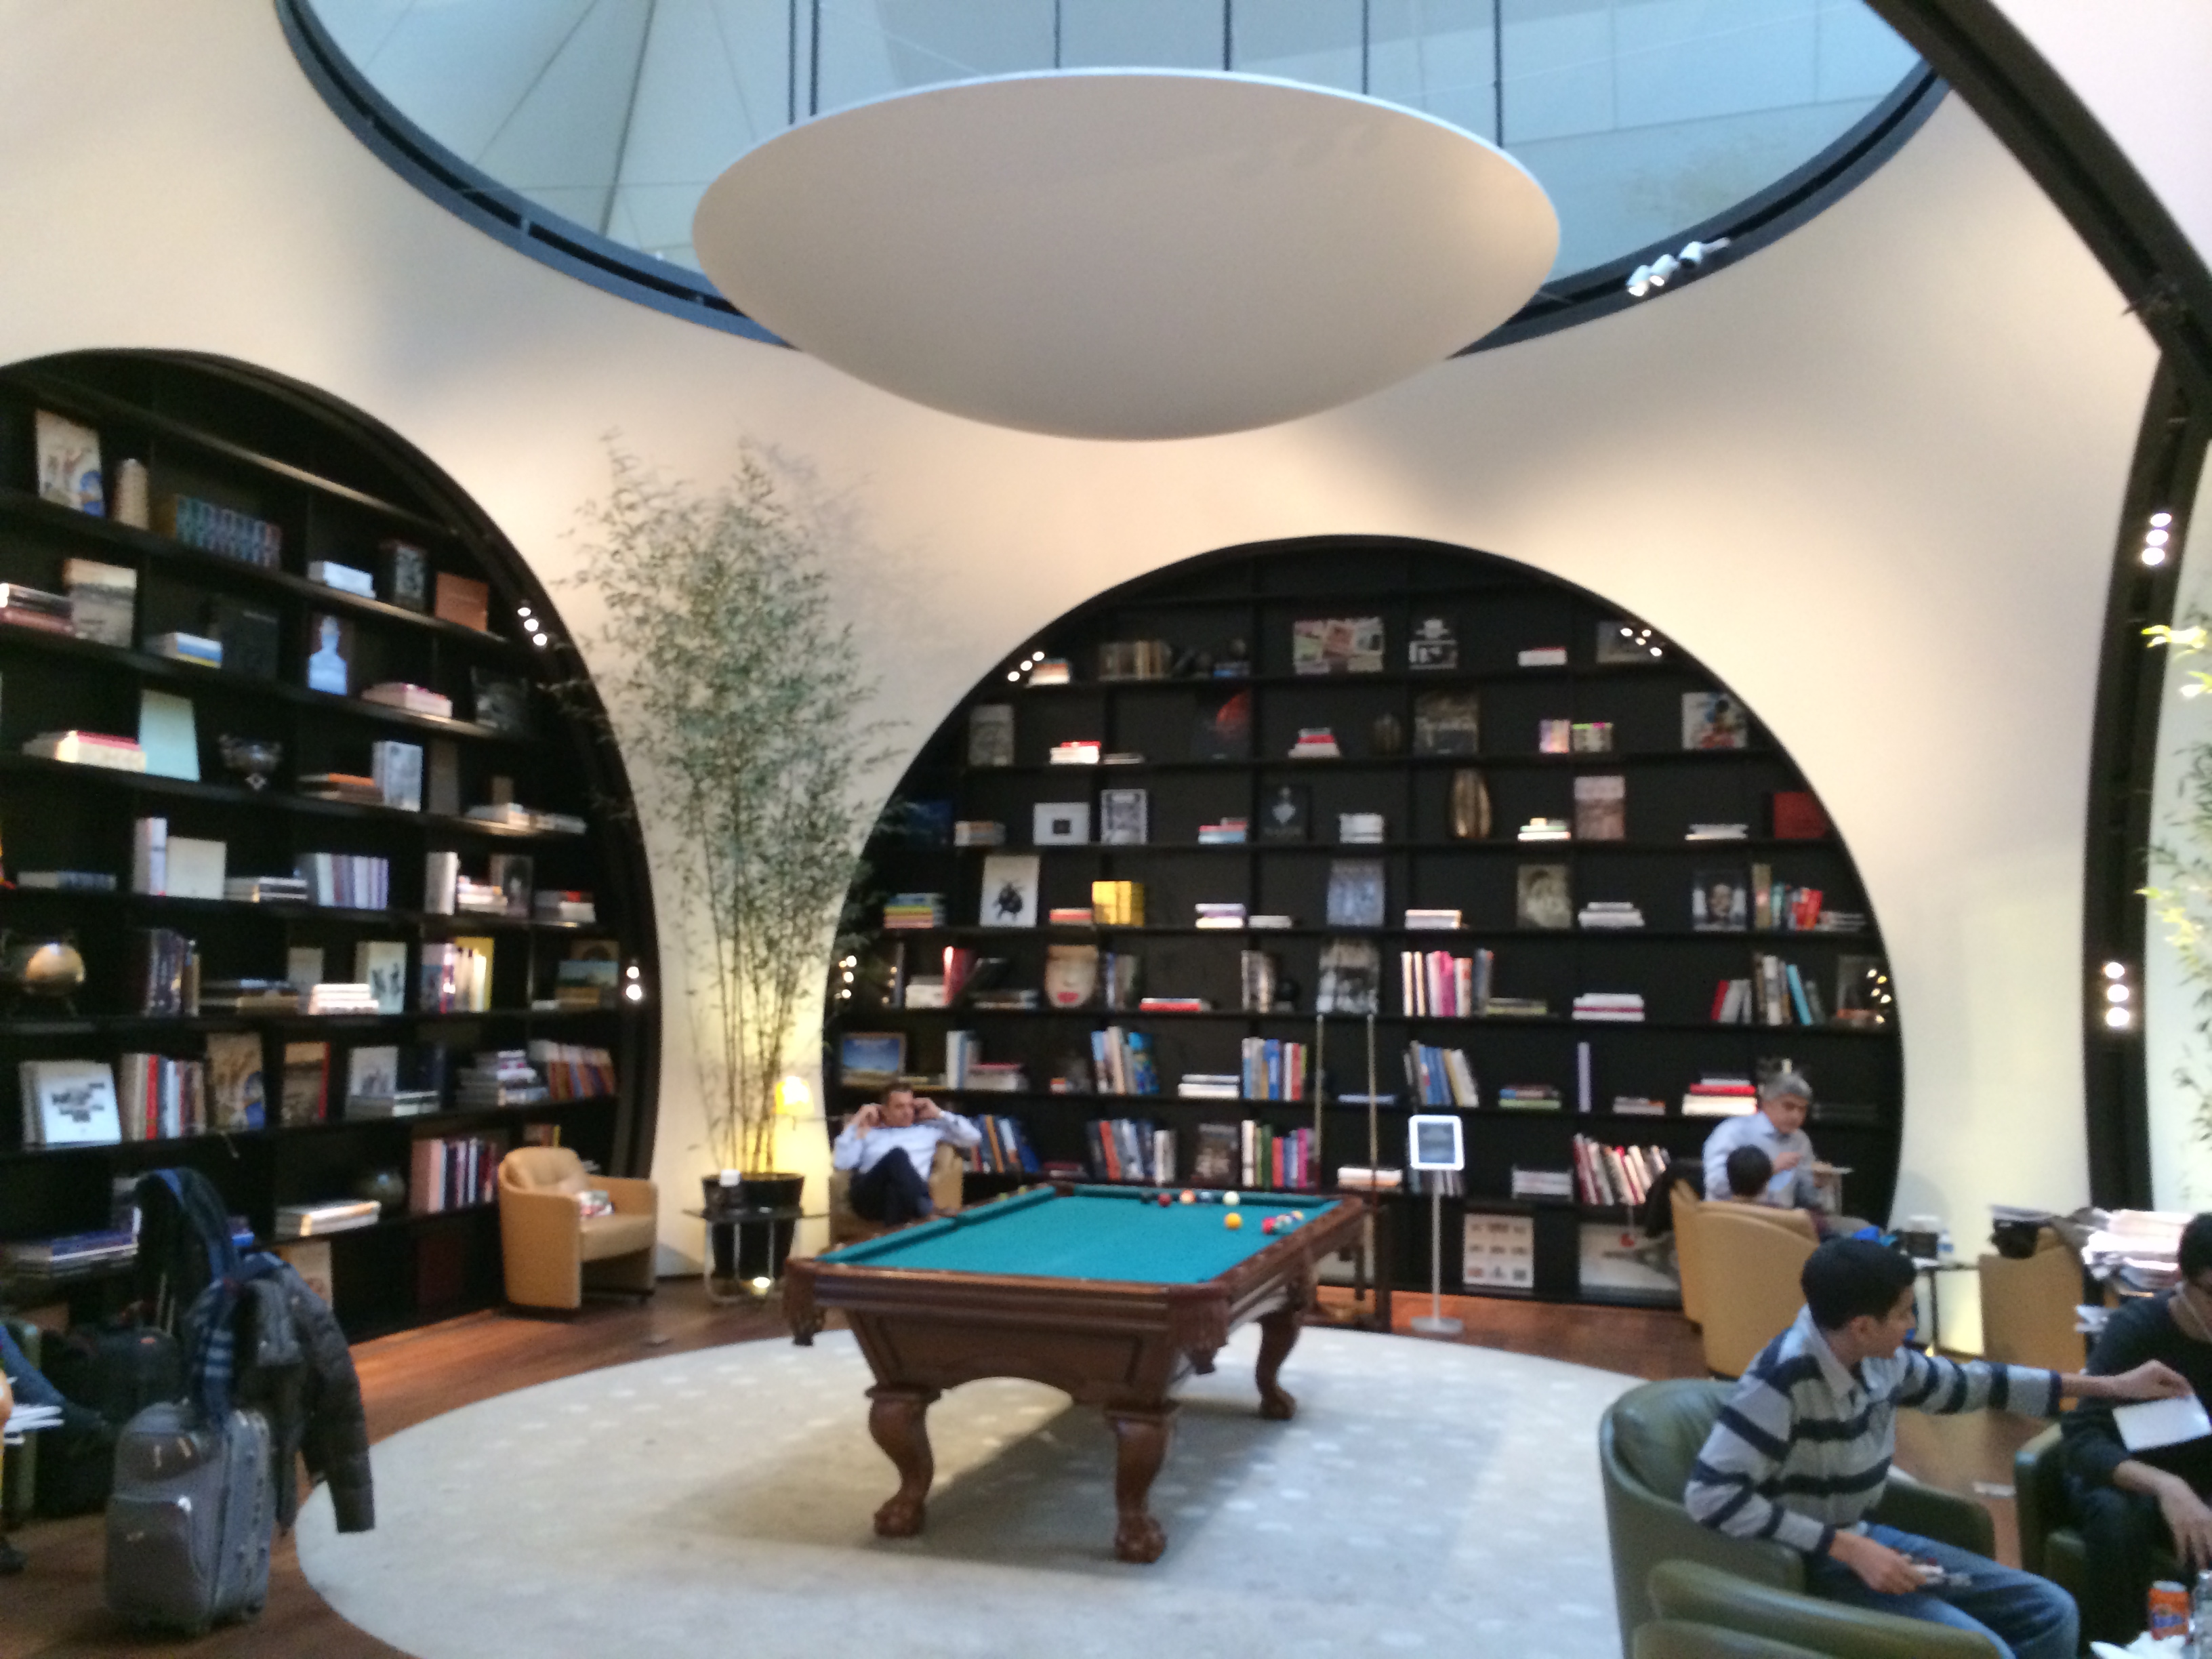 Pool table and library